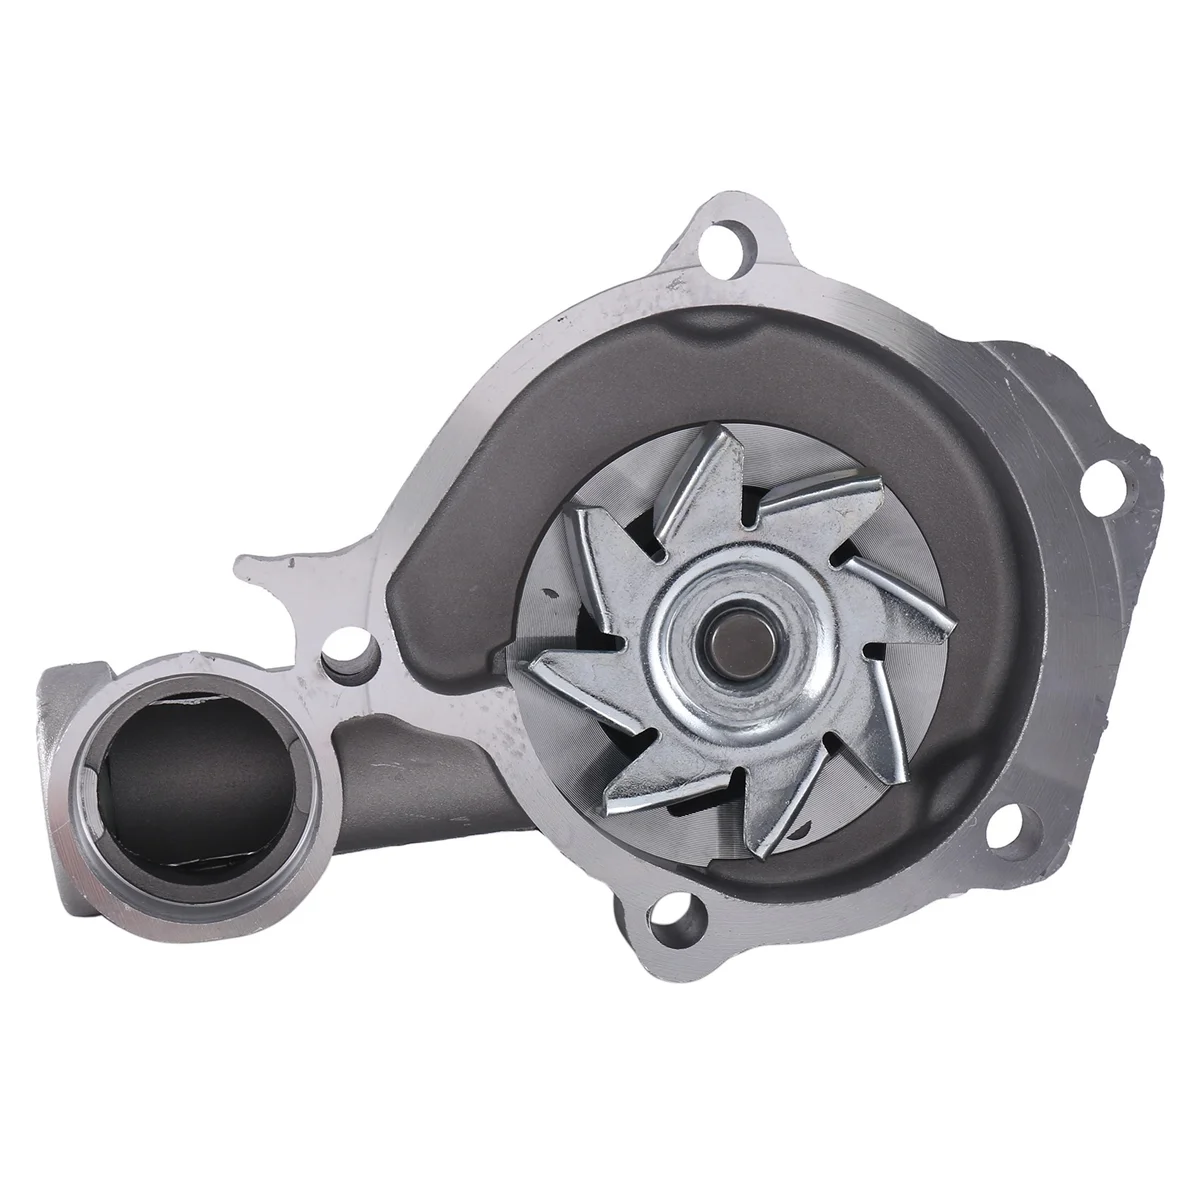 

SMD303389 Car Water Pump for Great Wall HAVAL H3 H5 WINGLE 3 WINGLE 5 4G63 4G64 4G69 Petrol Engine